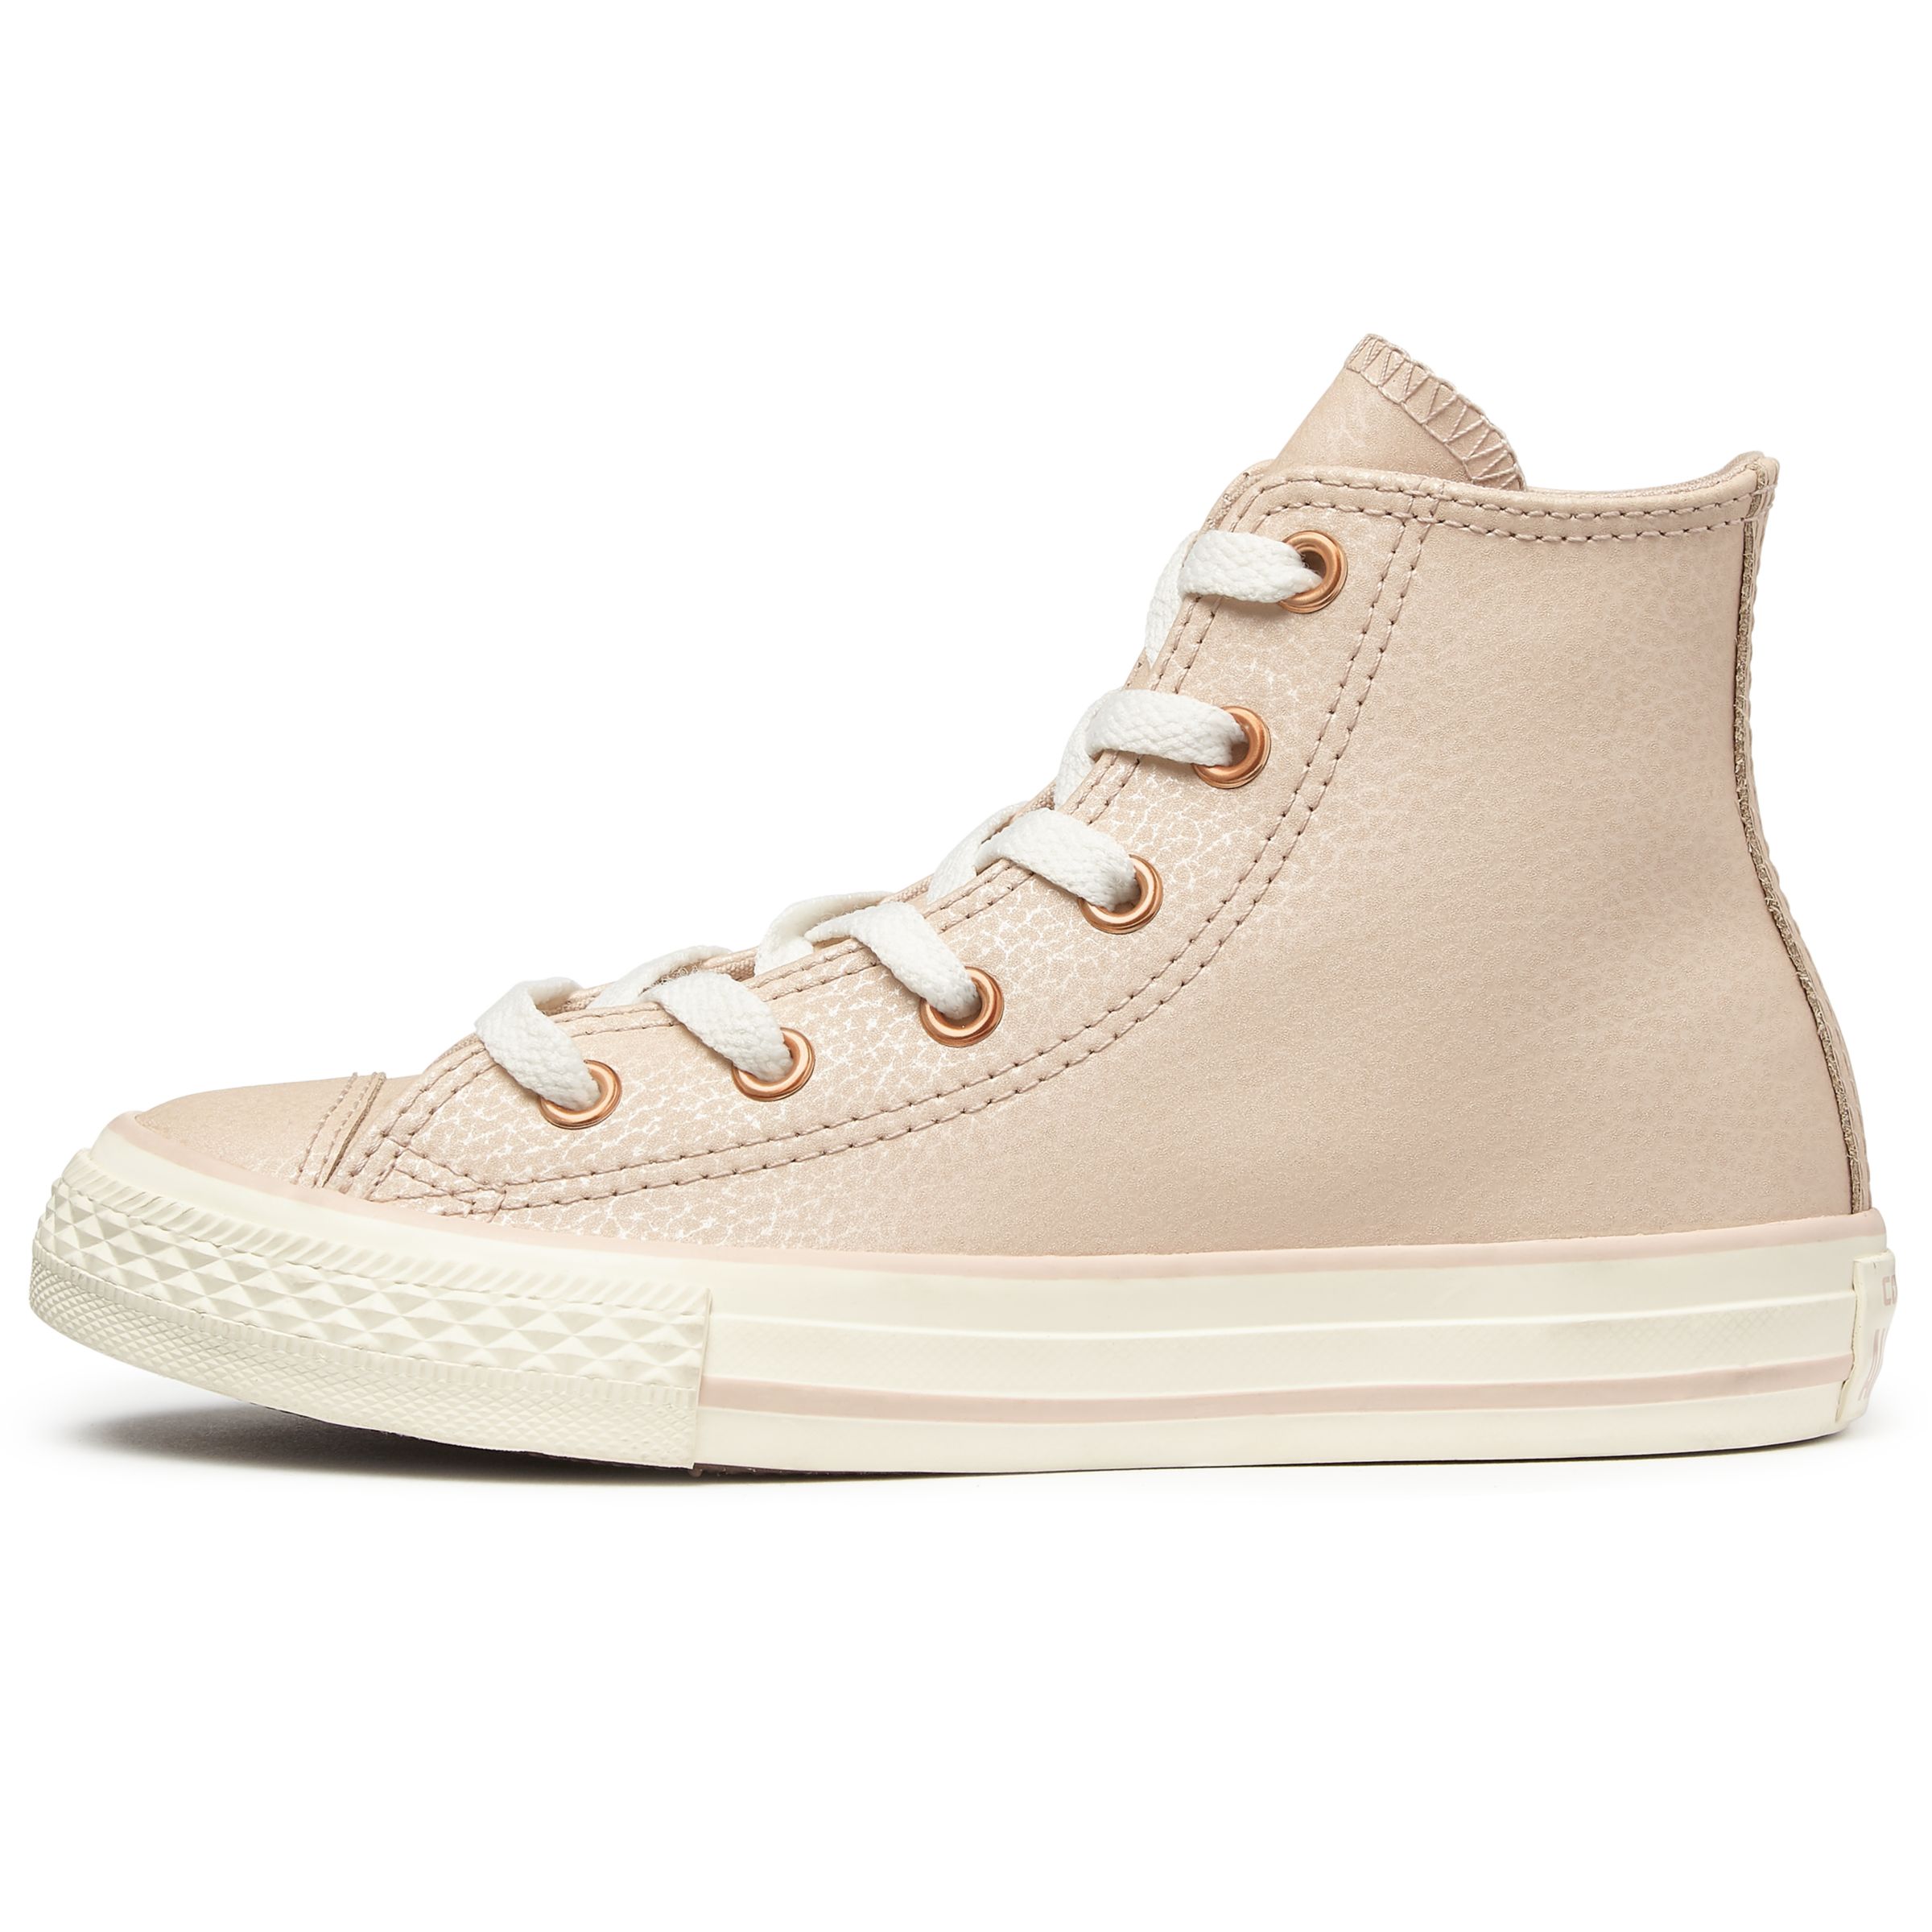 Converse Chuck Taylor All Star Hi-Top Trainers, Pink, 1